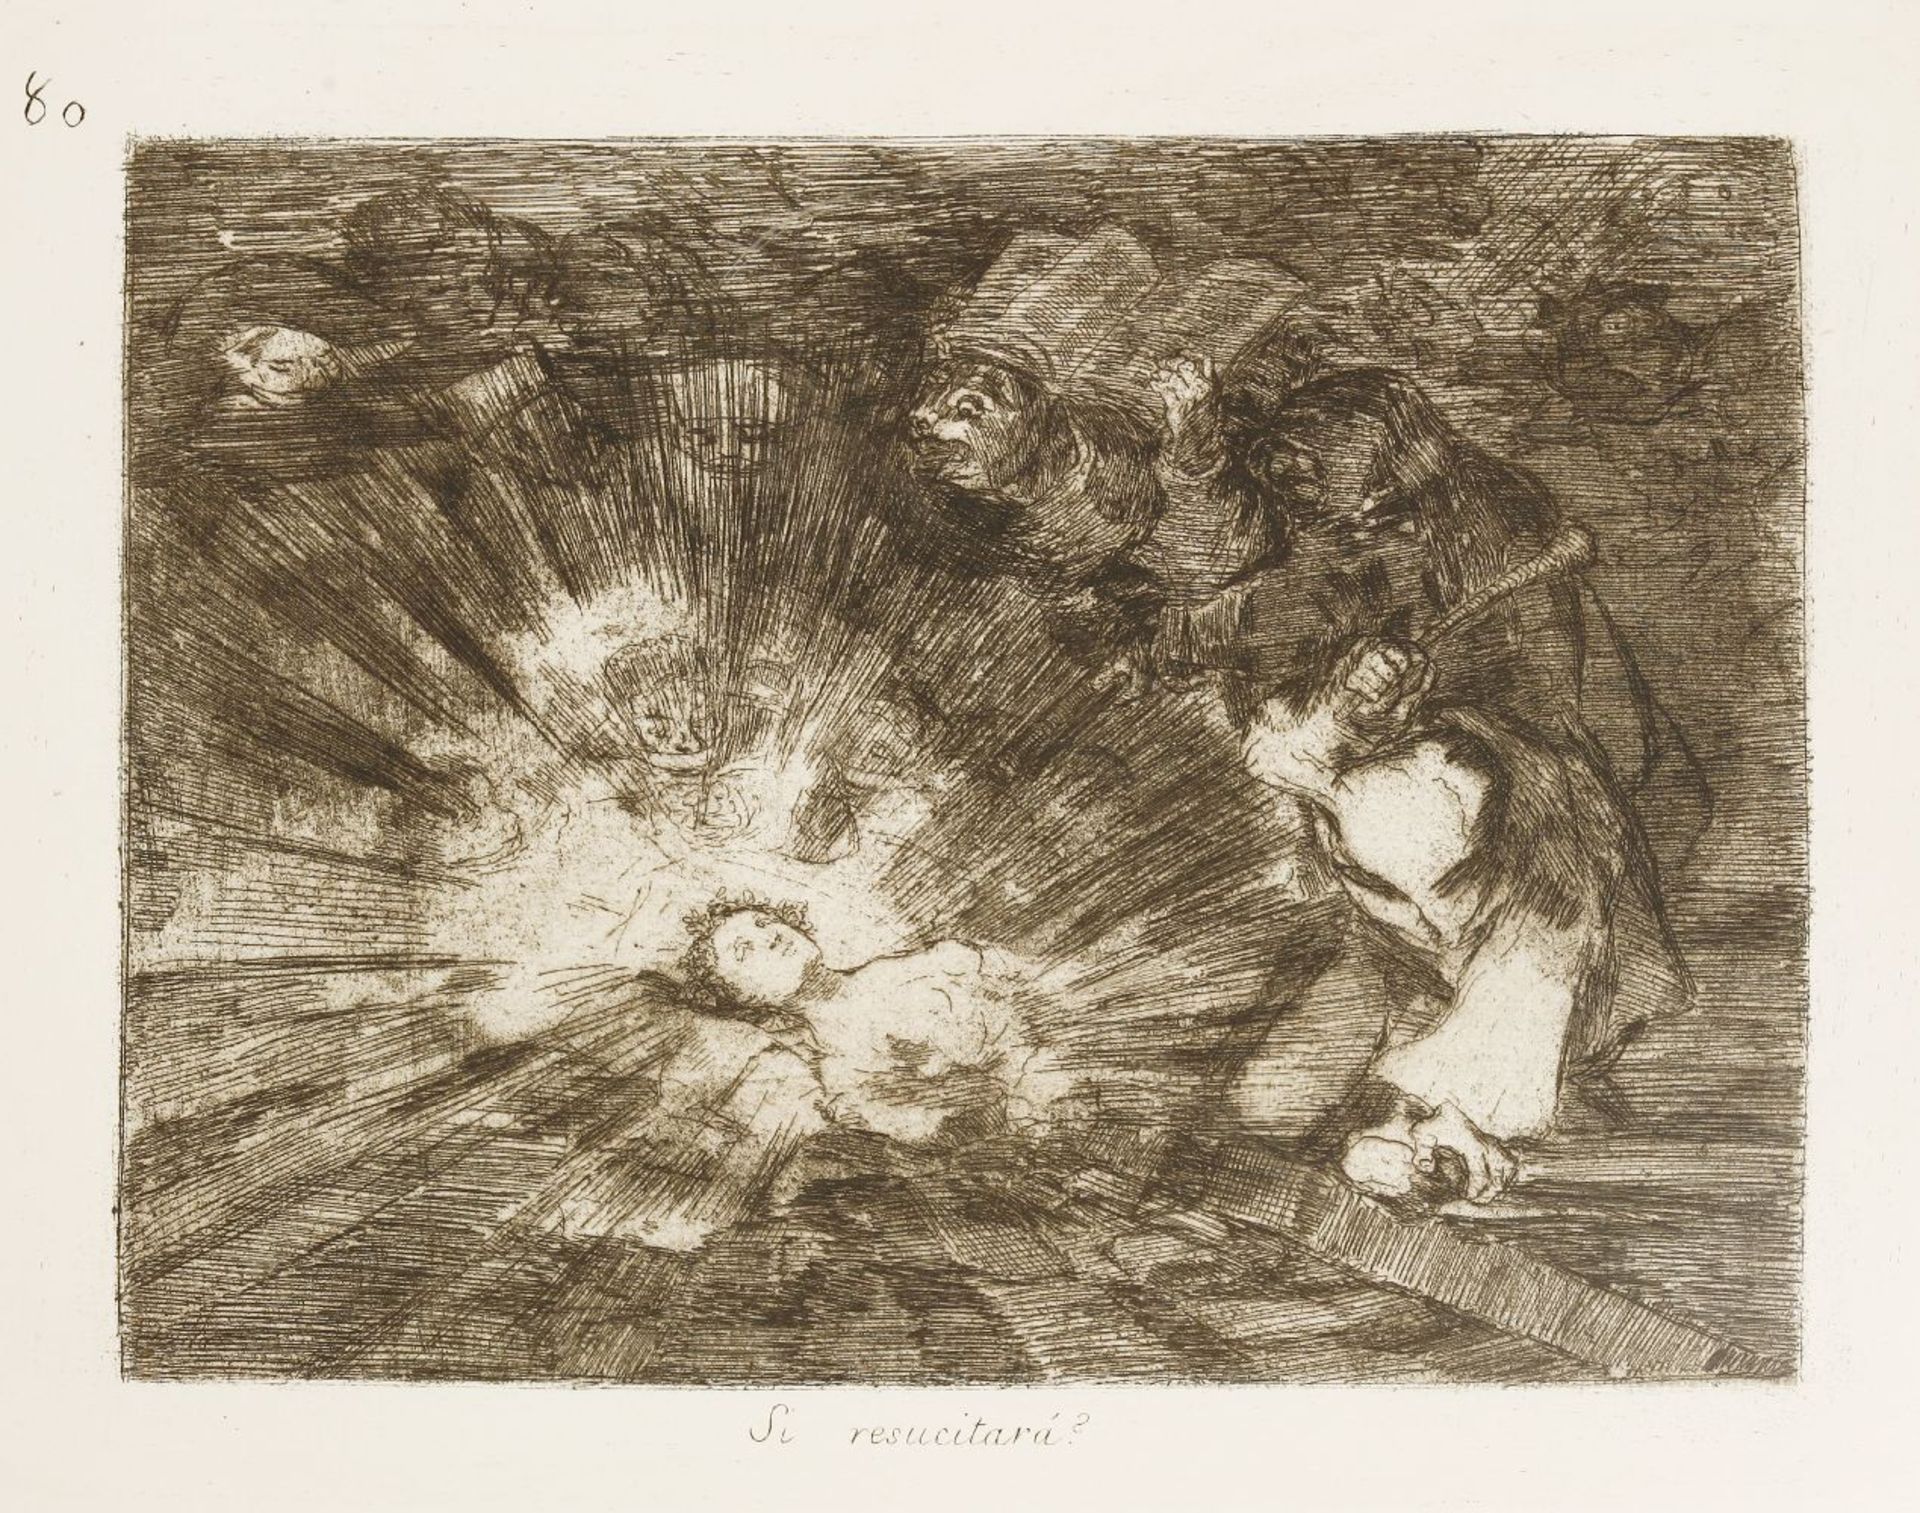 Francisco Goya (Spanish, 1746-1828)'SI RESUCITARA?'Etching, 1814-1815, plate 80 from the